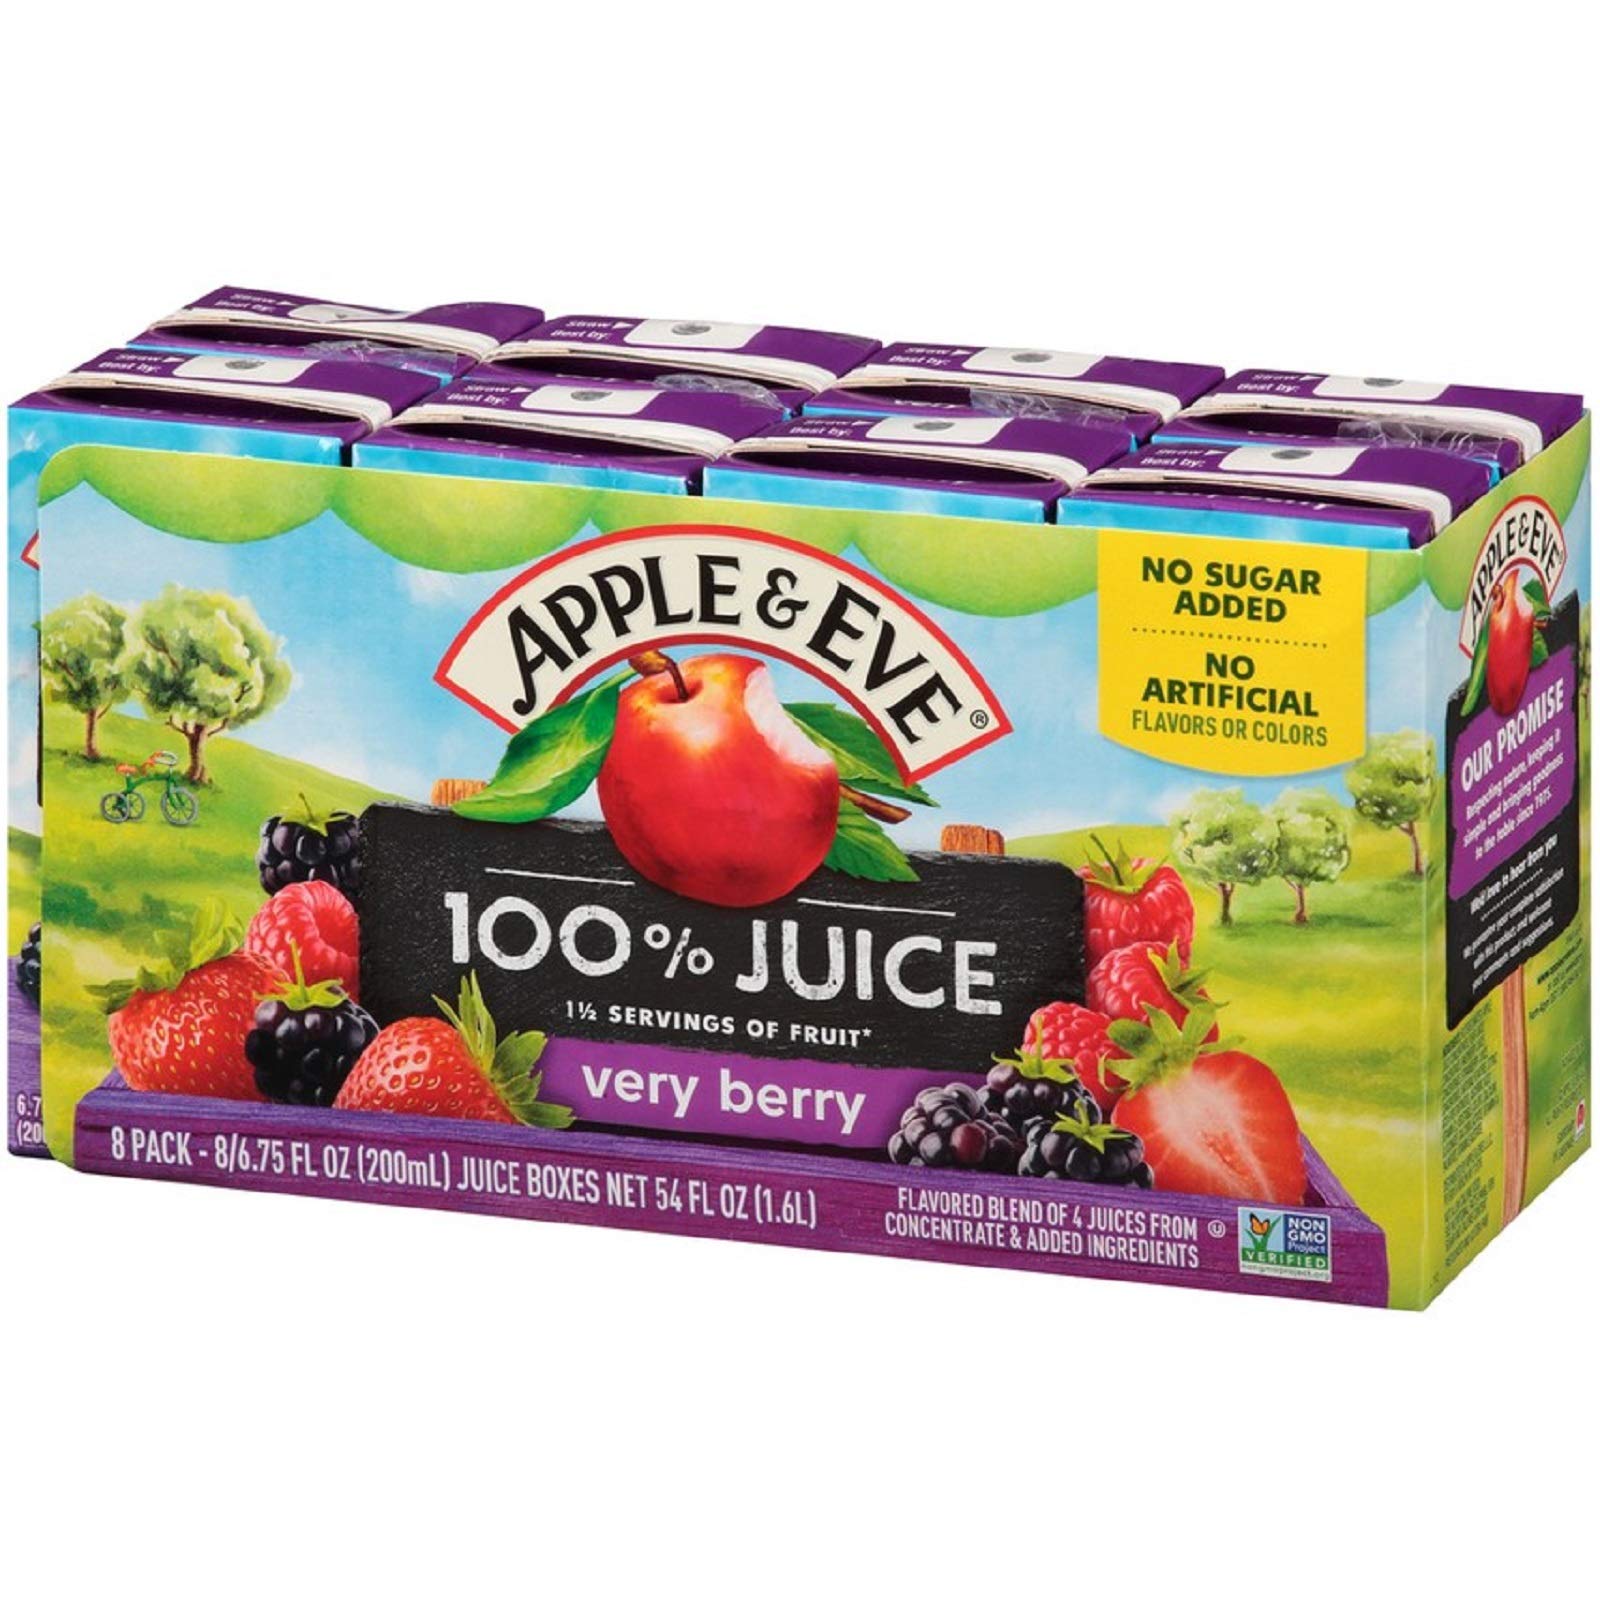 Apple & Eve 100% Juice Very Berry, No Sugar Added, 6.75 Fl Oz, Pack of 8